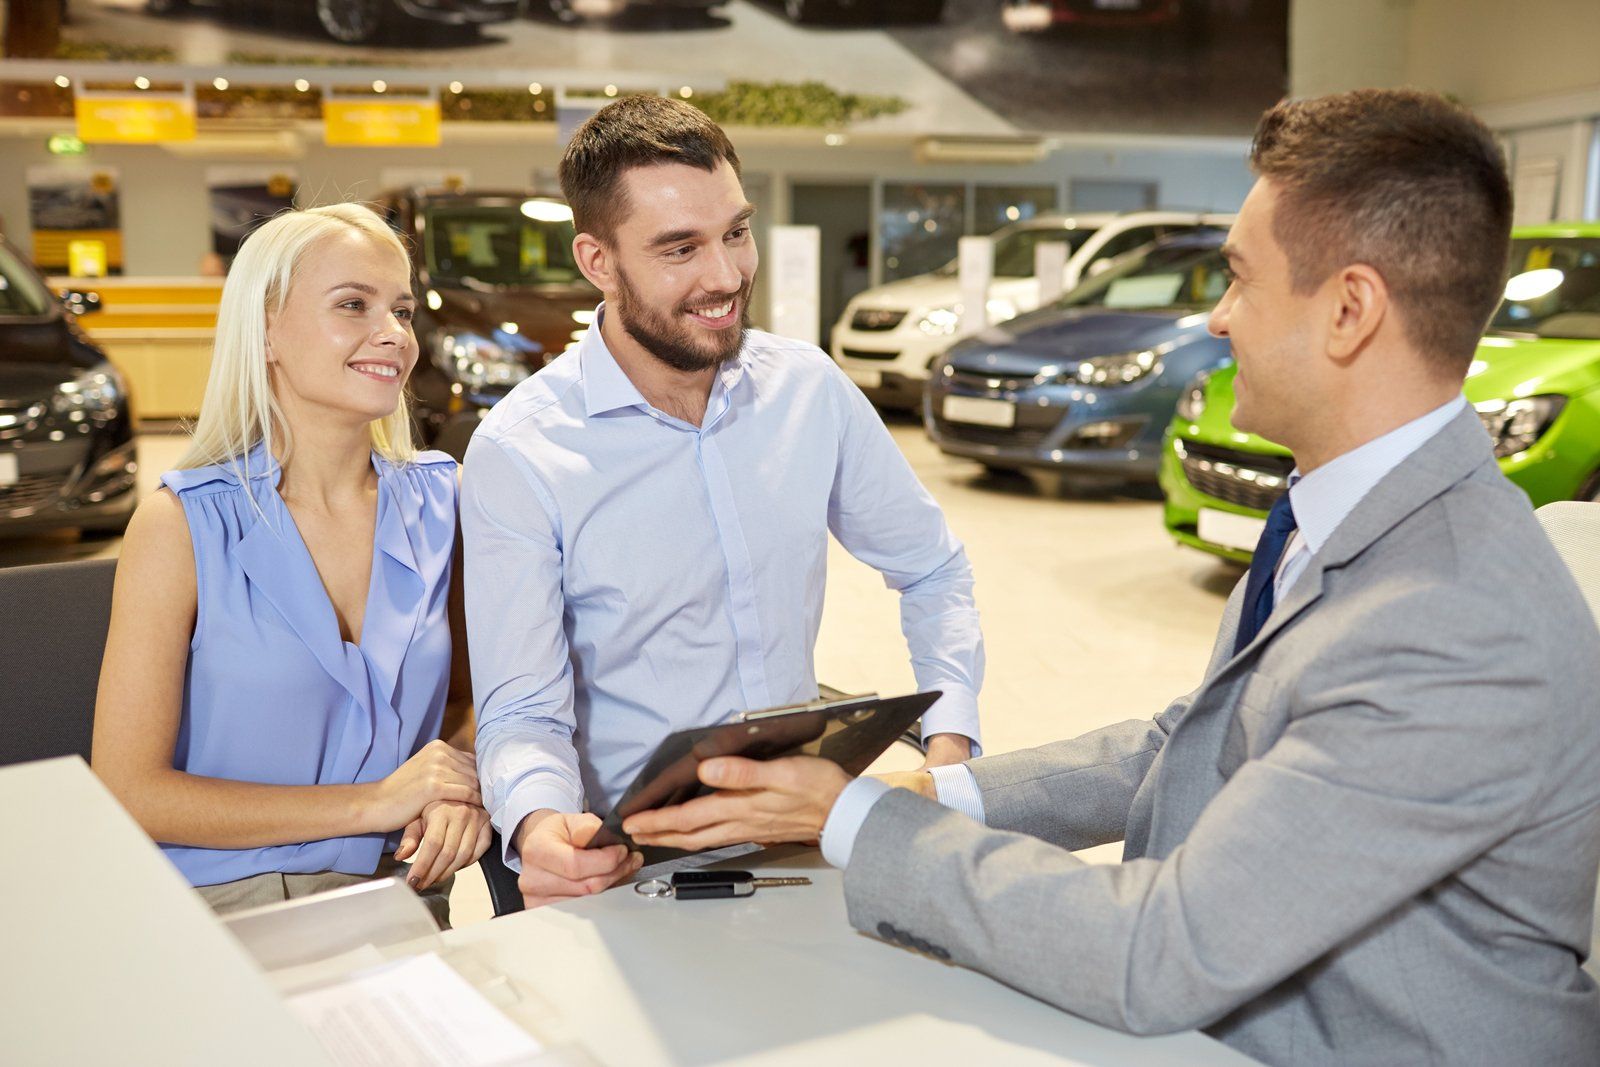 Car Finance Broker showing clients paperwork for new car loan